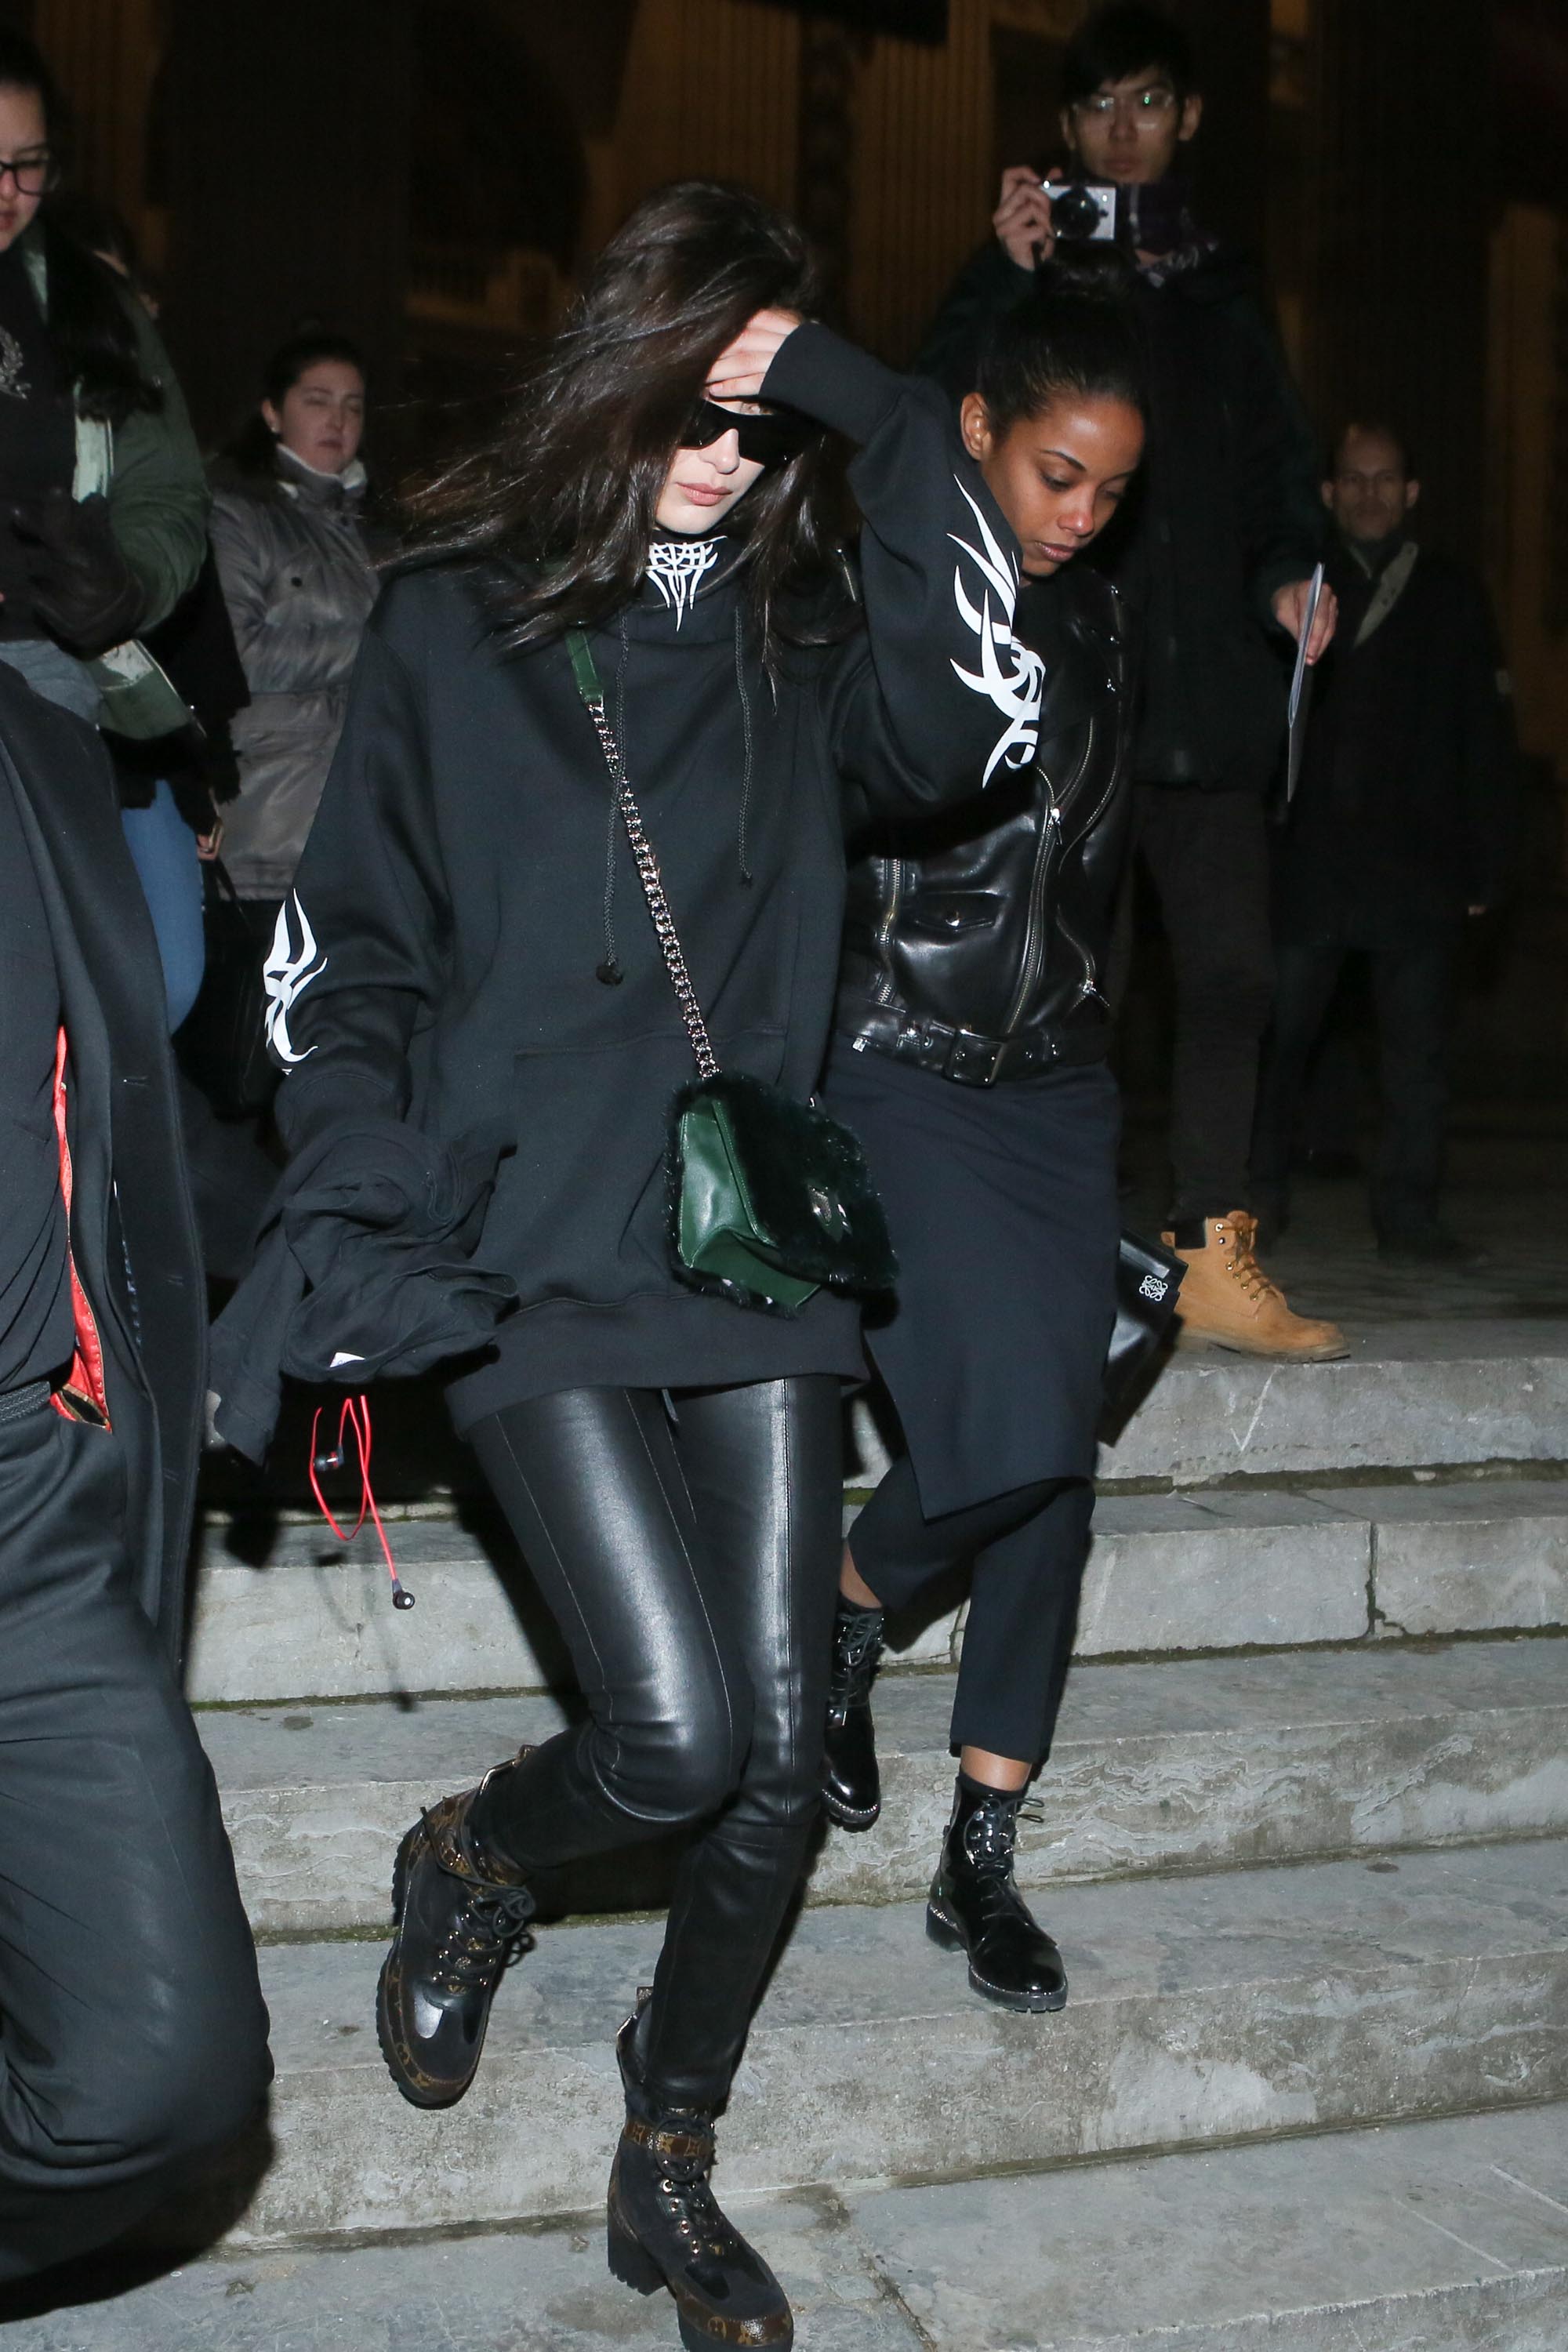 Bella Hadid & Kendall Jenner out in Paris